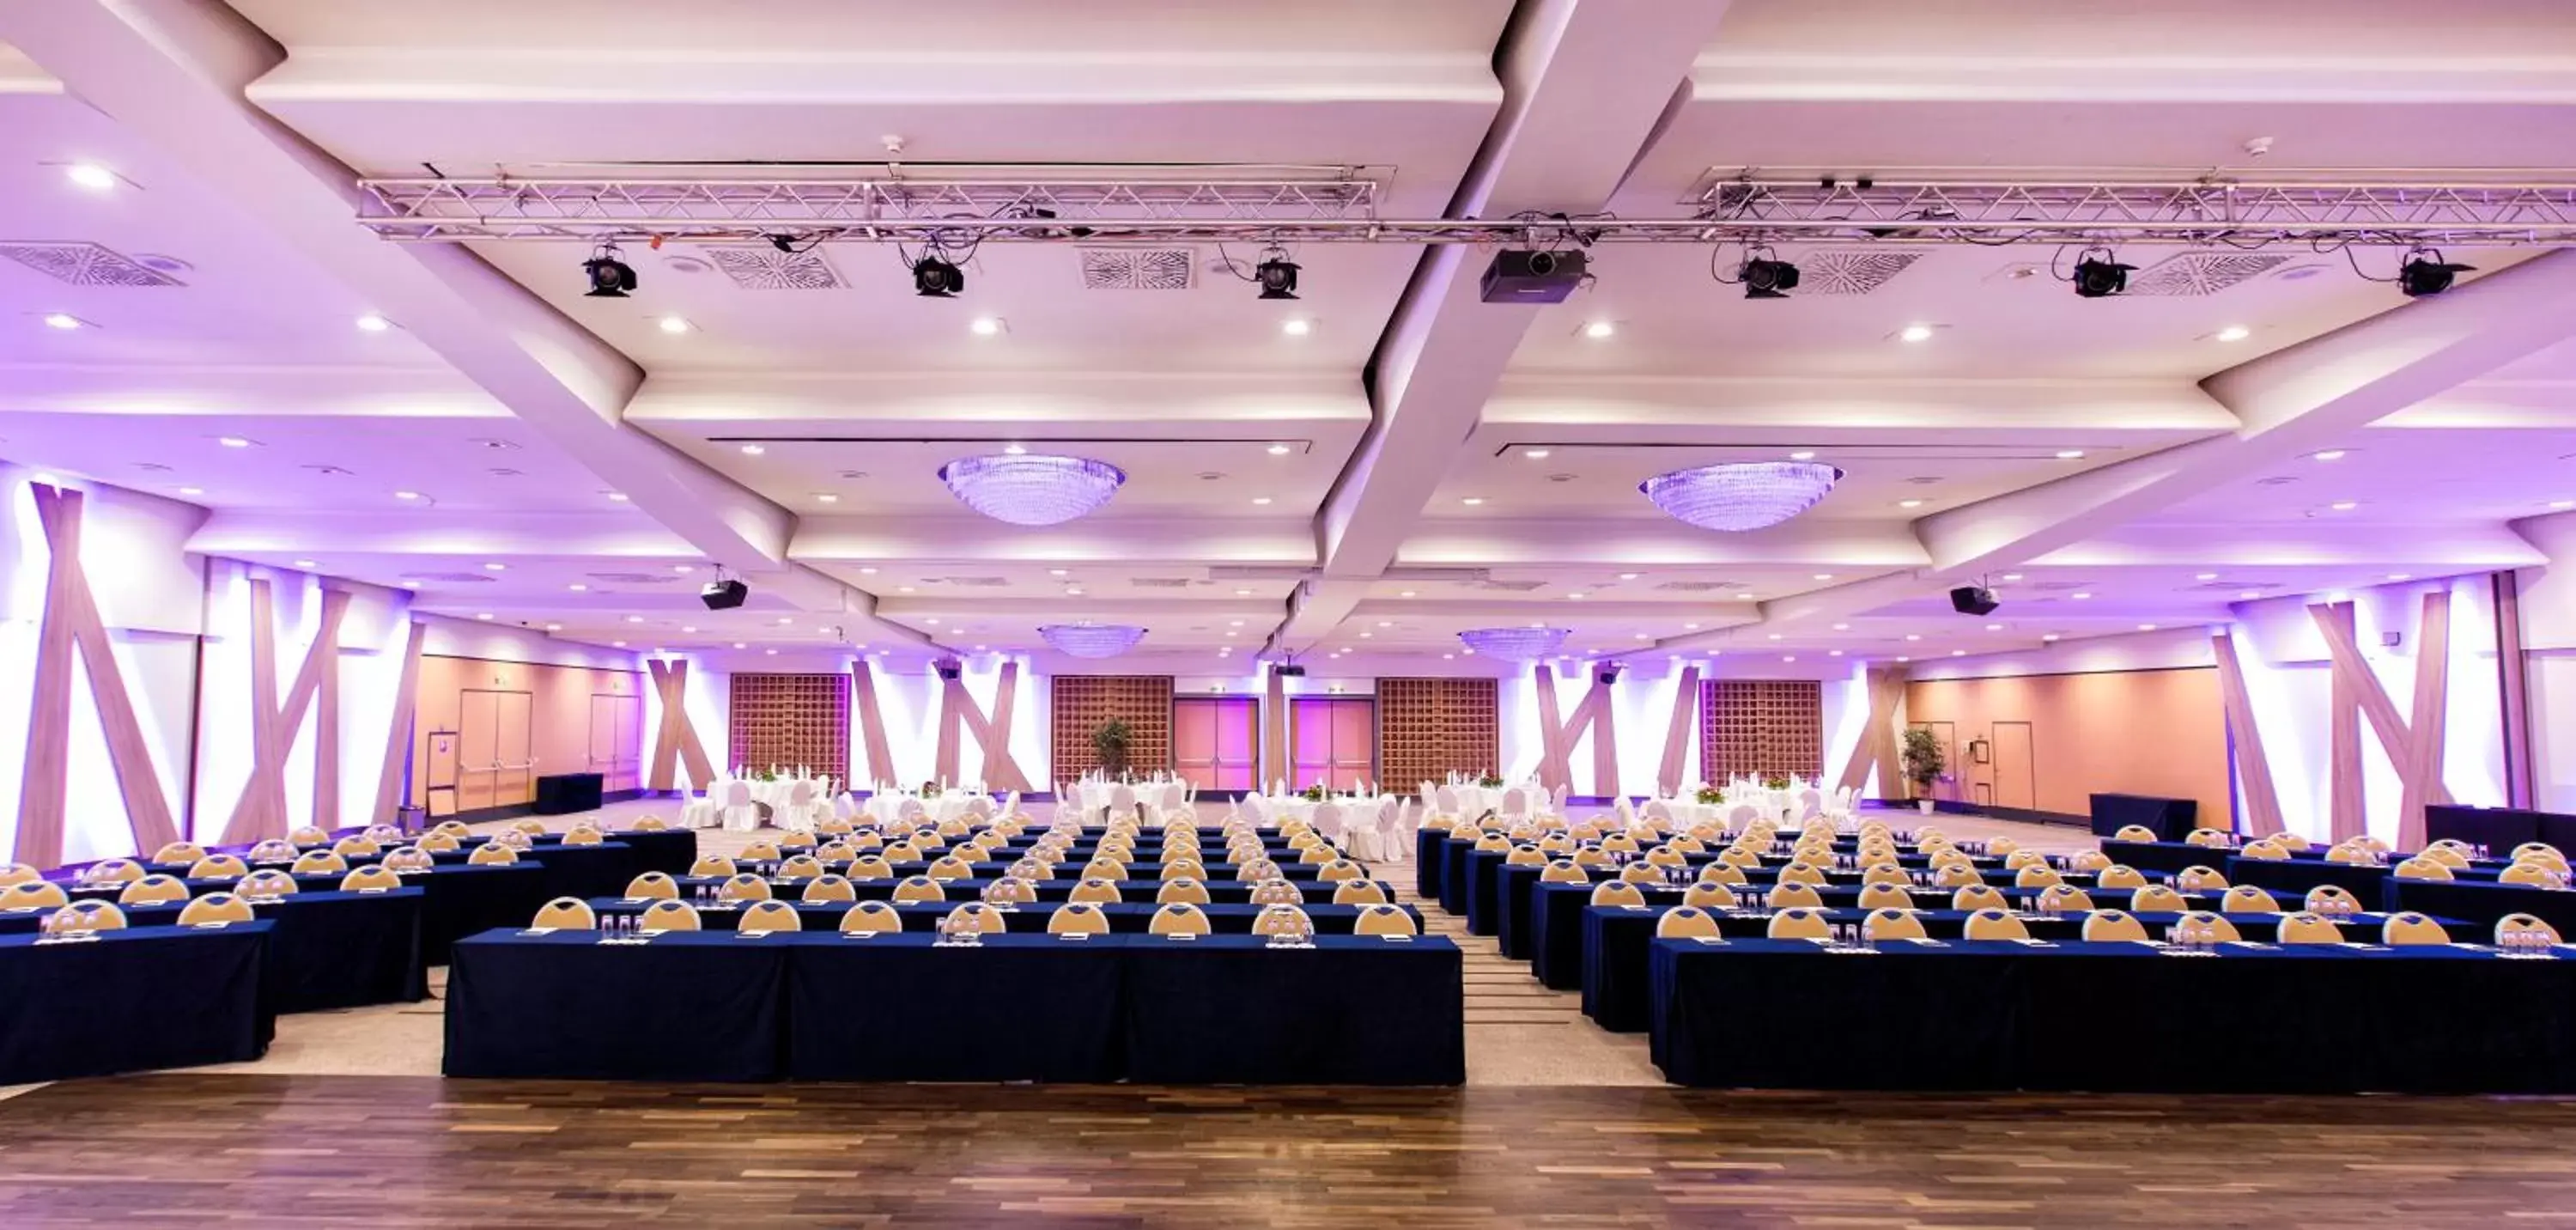 Business facilities, Banquet Facilities in Wyndham Grand Salzburg Conference Centre